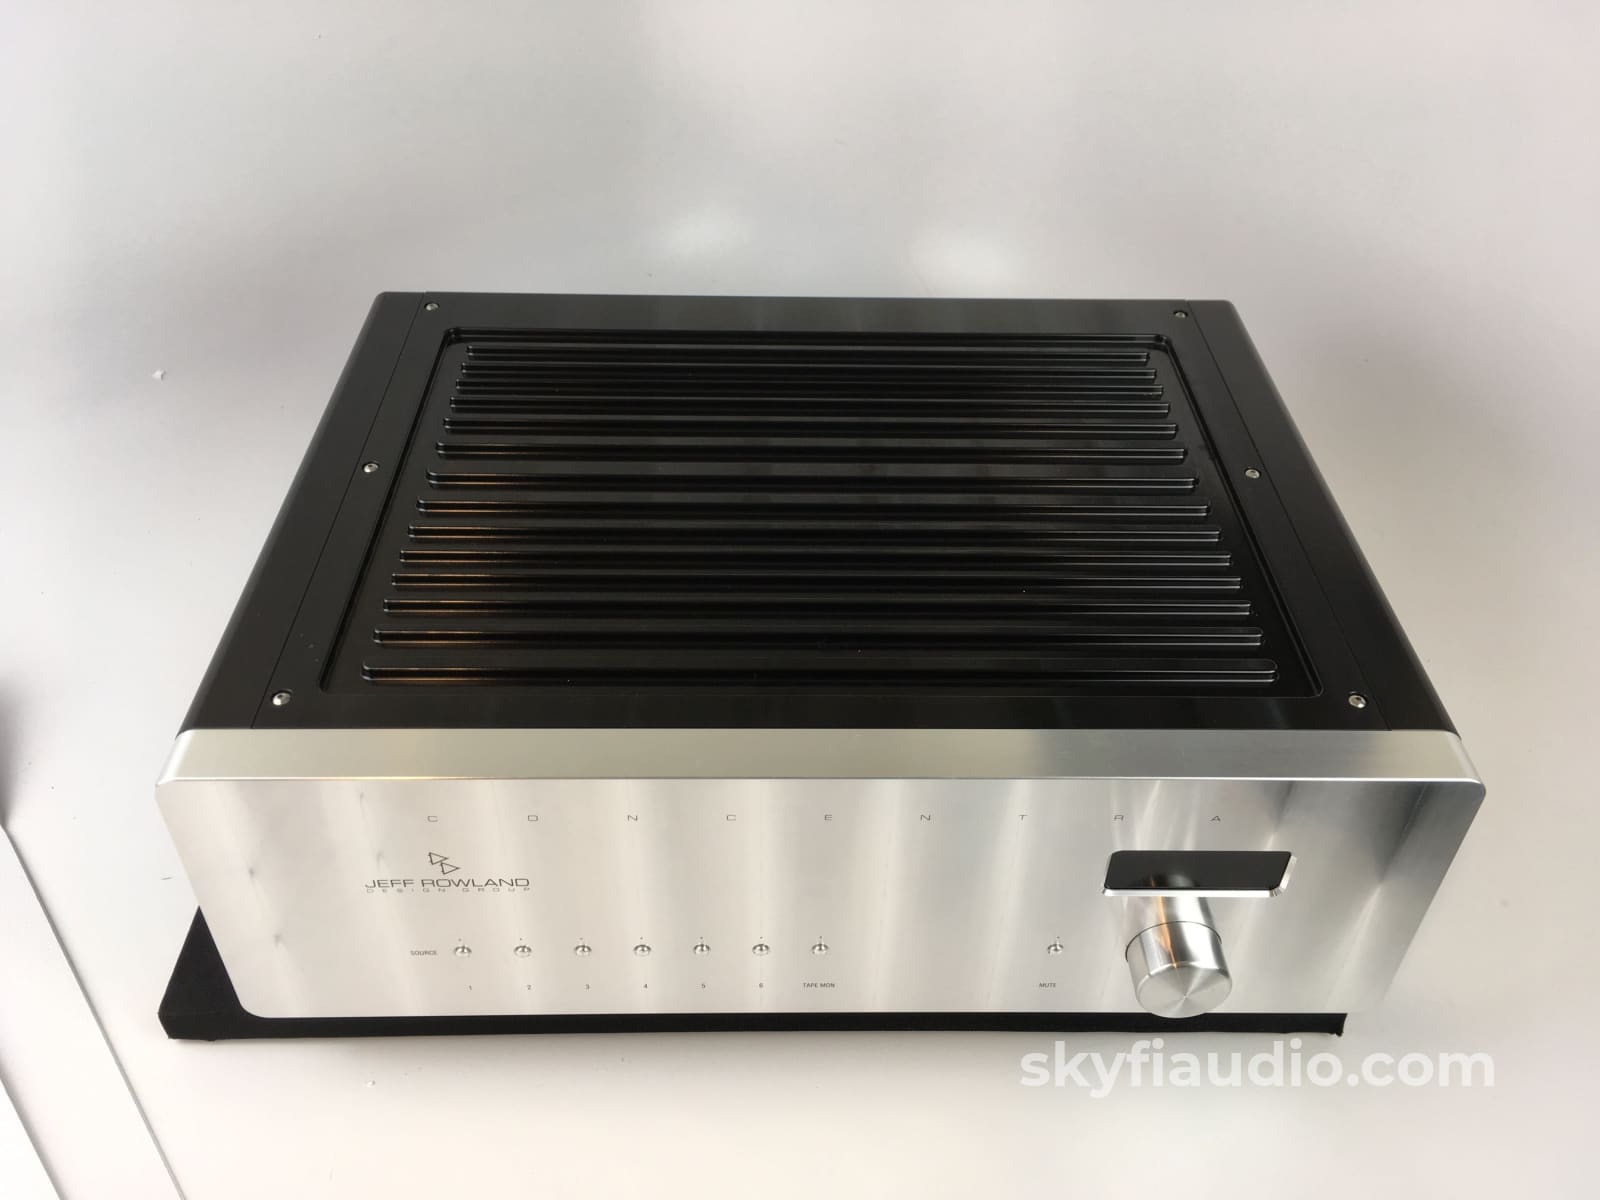 Jeff Rowland Concentra Integrated Solid State Amplifier